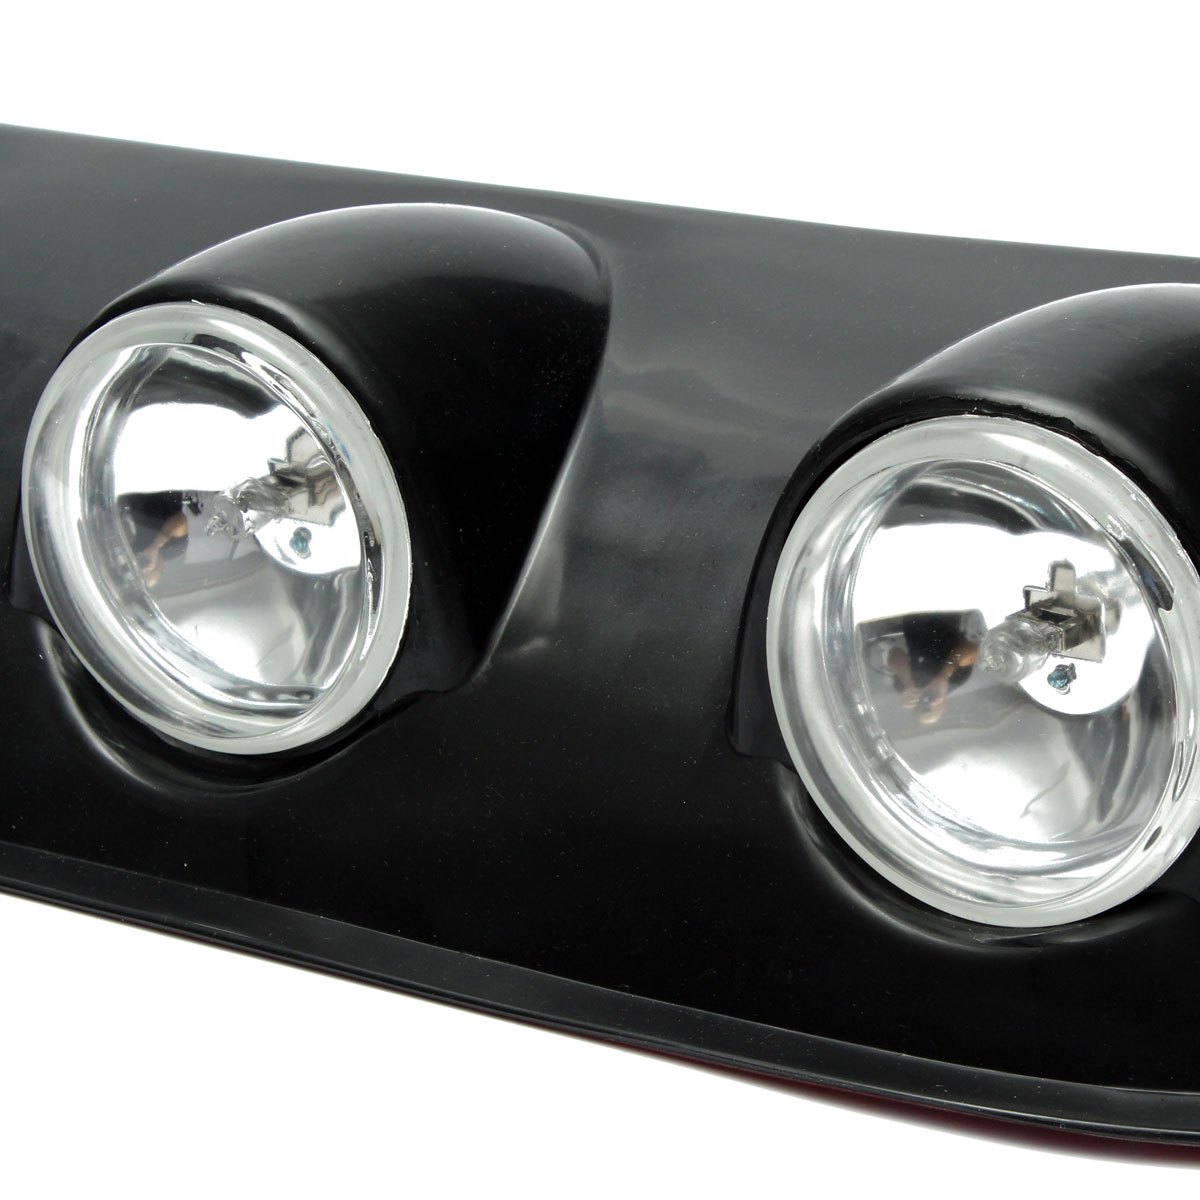 H3-55W-Roof-Top-Combined-Fog-Lights-Driving-Lamp-12V-Amber-for-Jeep-Pickup-4X4-Off-Road-Car-1057014